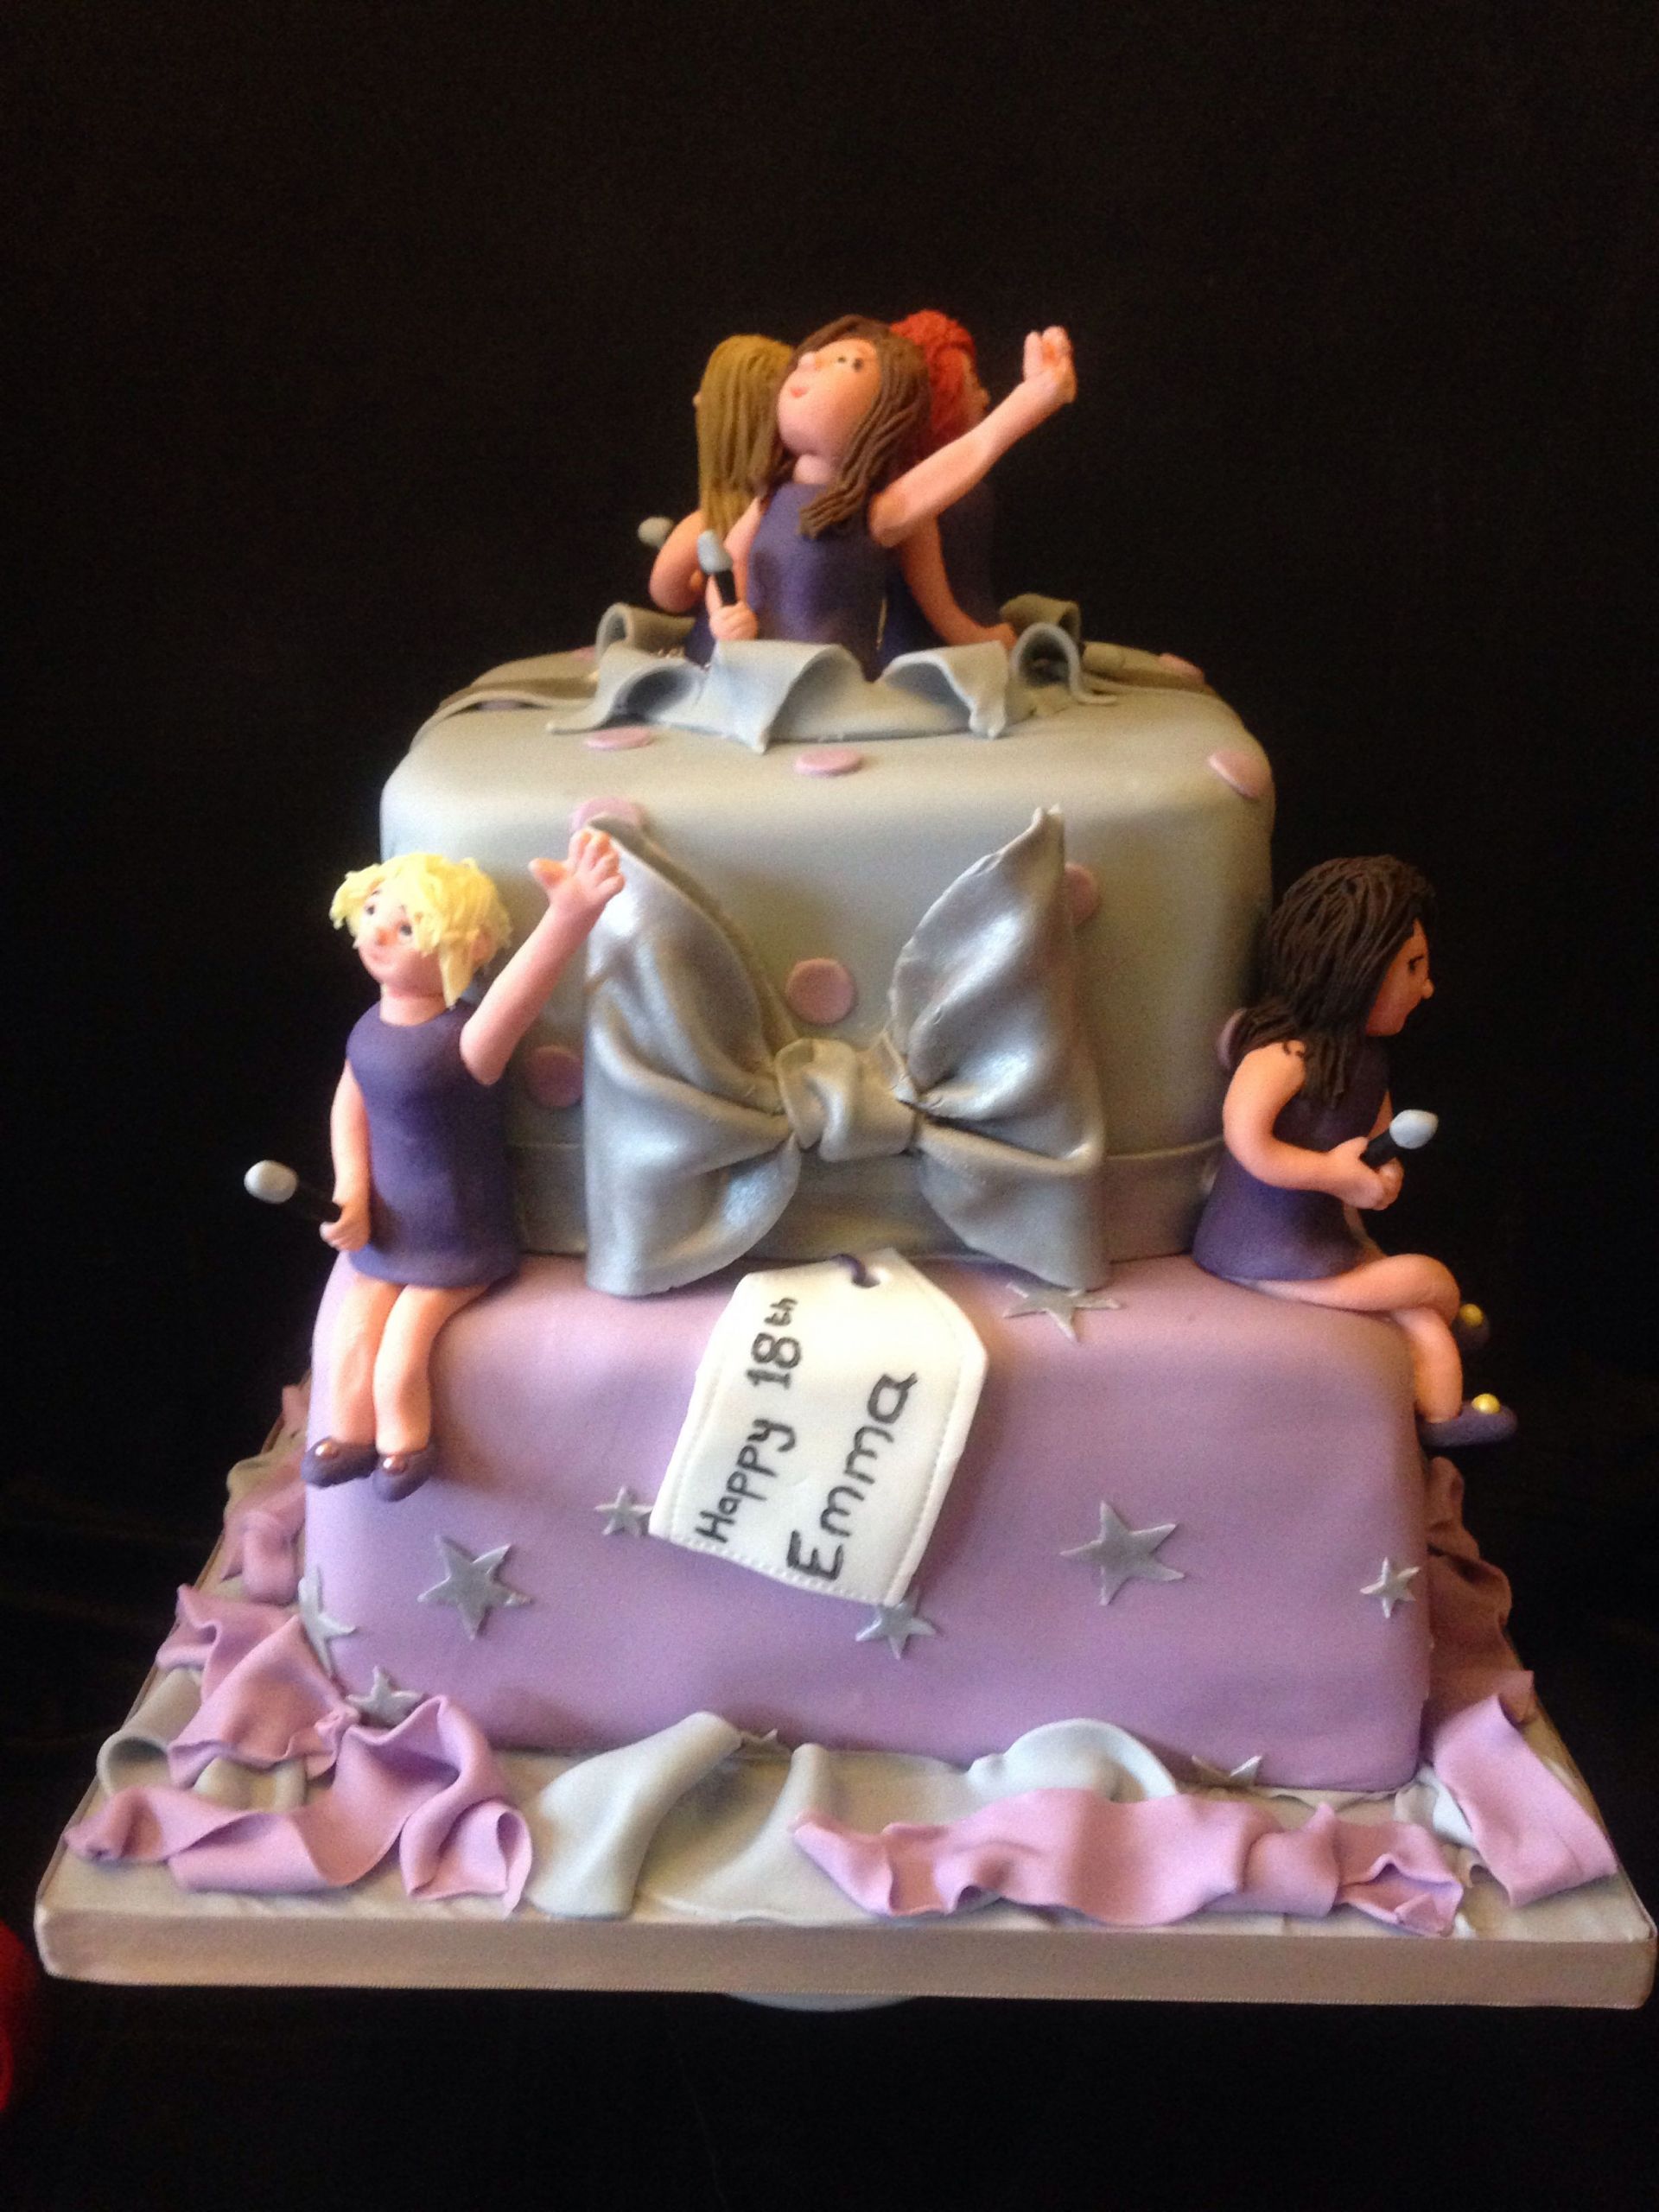 Gift Ideas For 18Th Birthday Girl
 Girls aloud and presents cake Perfect for an 18th